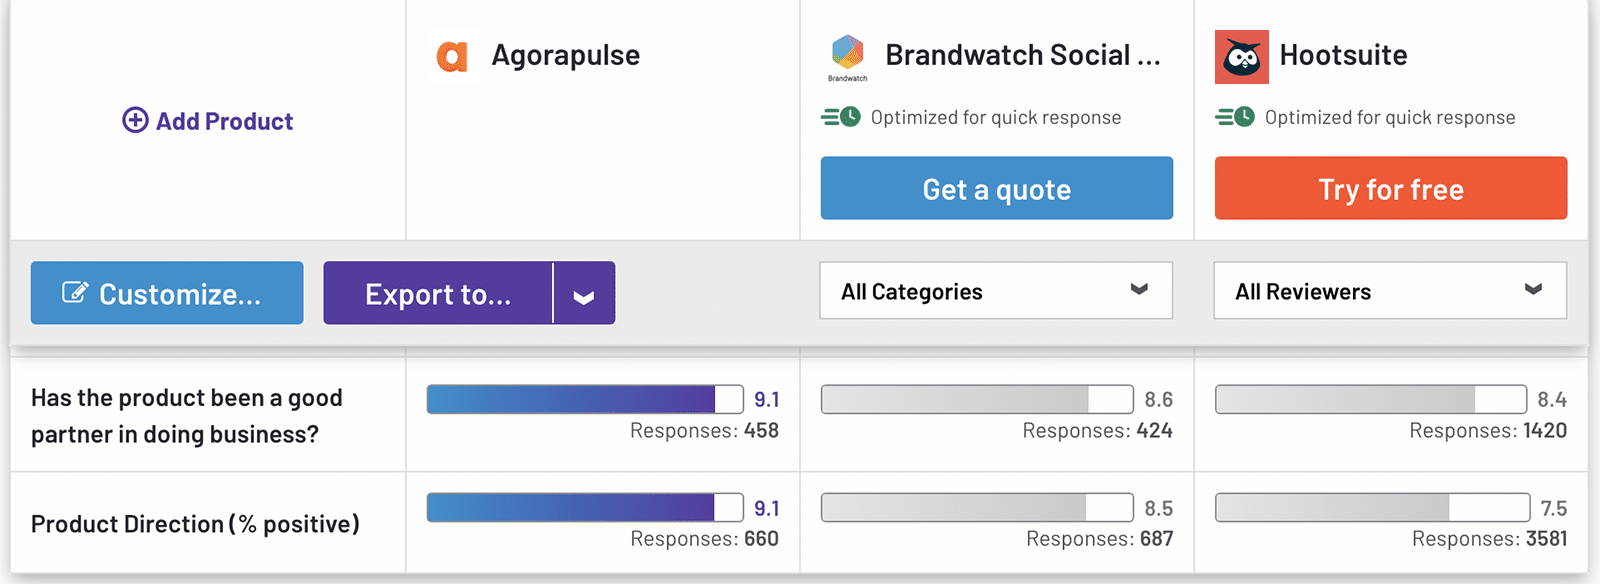 G2 comparison between Agorapulse, Brandwatch, and Hootsuite showing product direction